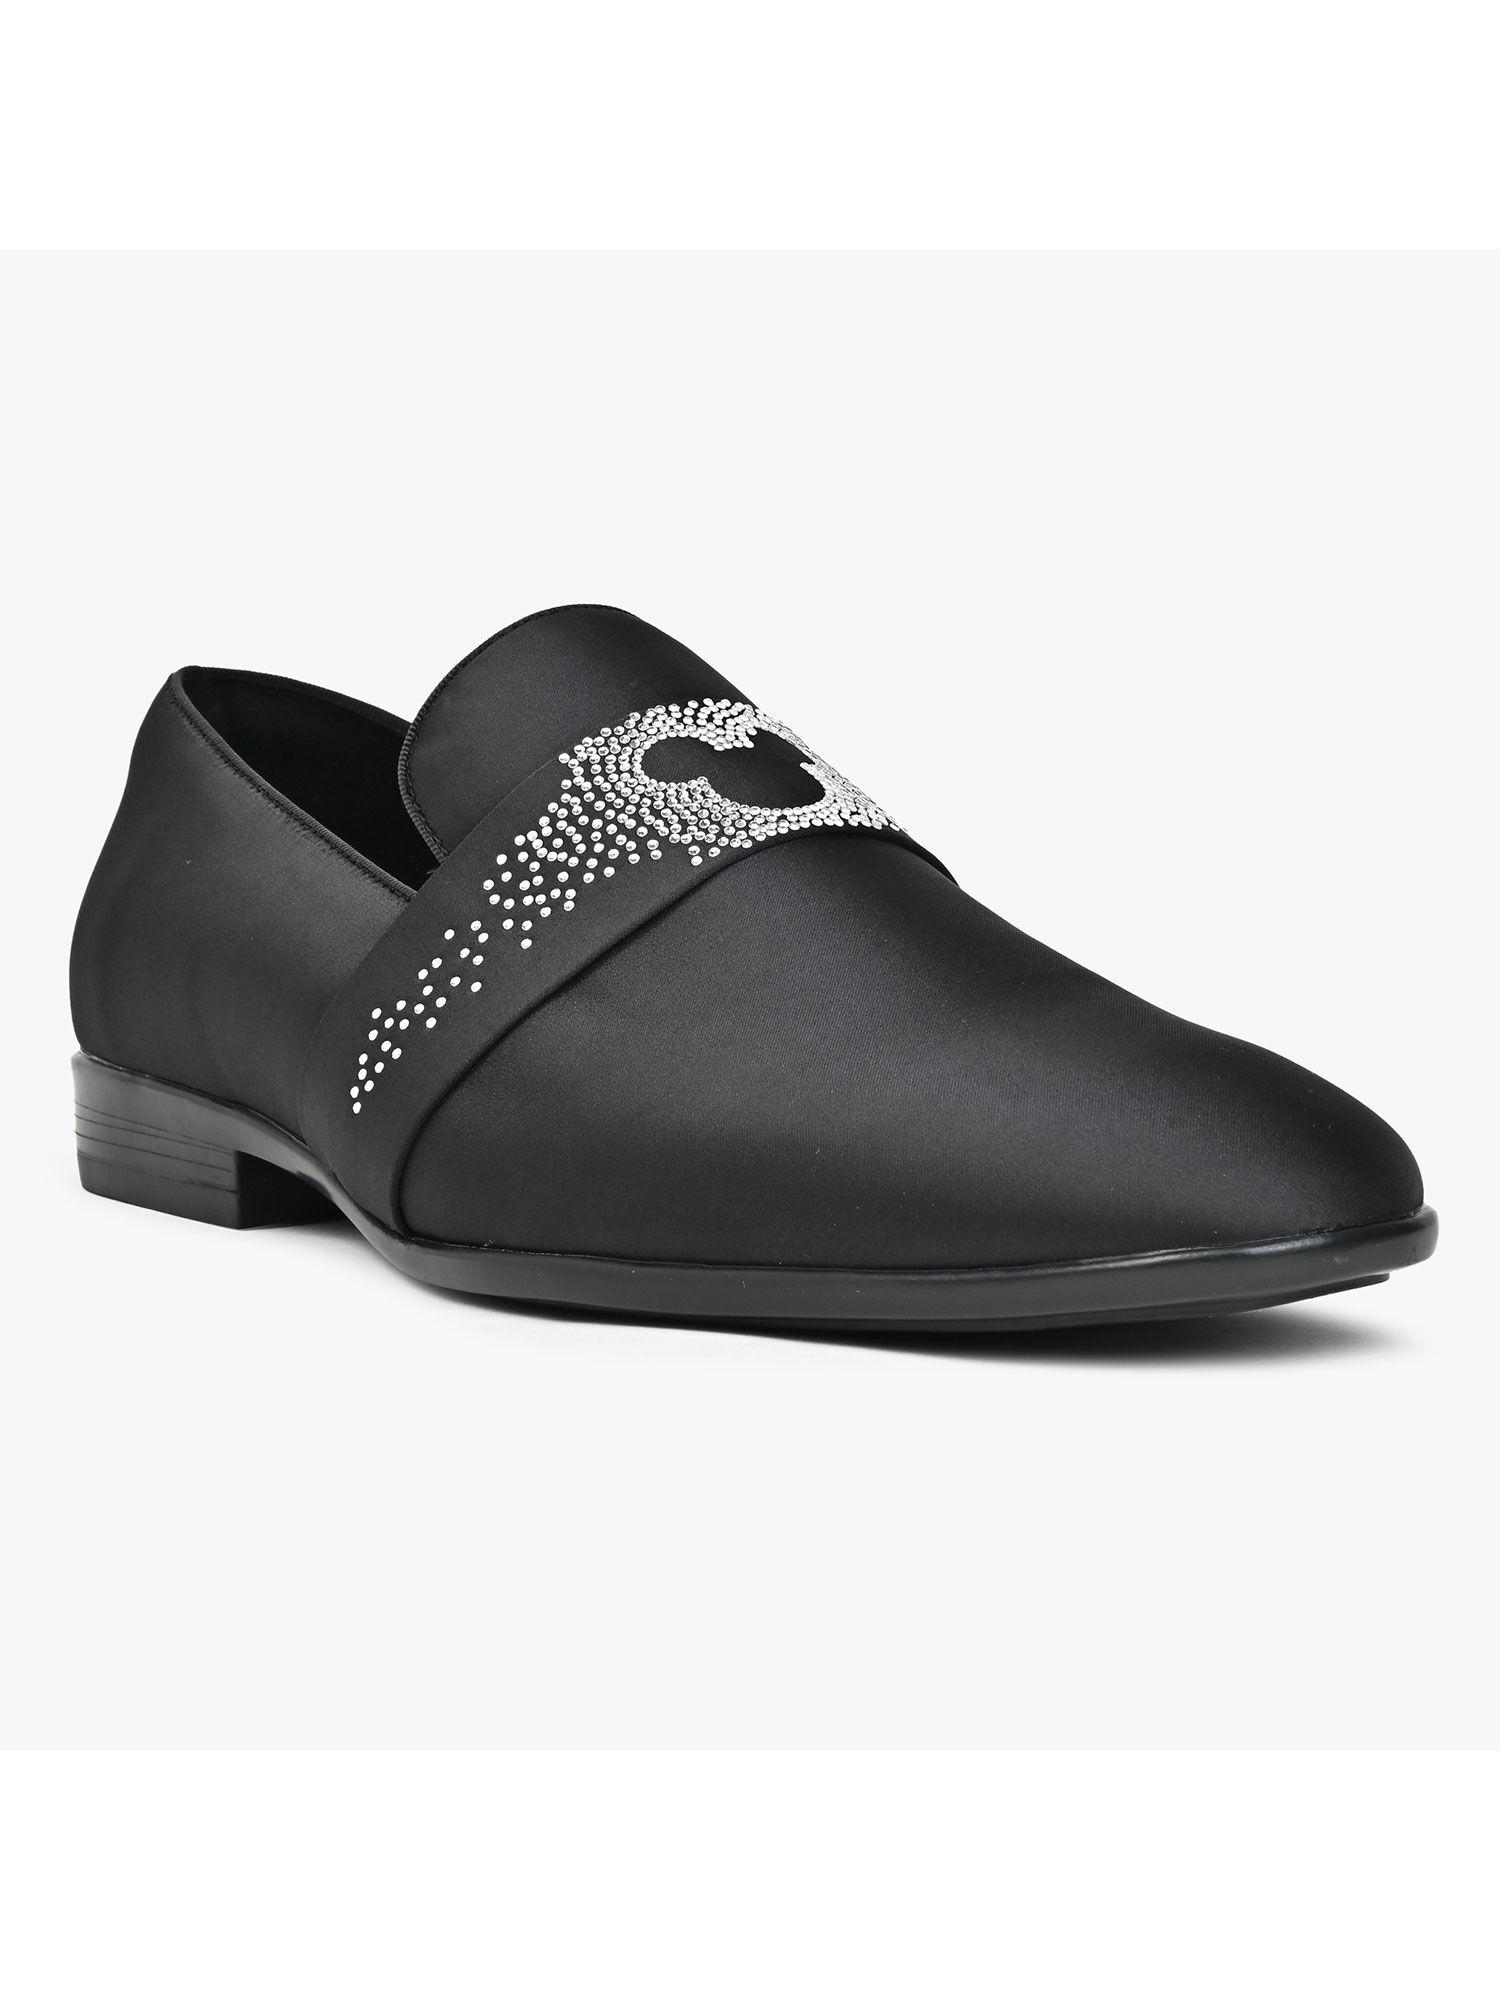 men-casual-loafers-black